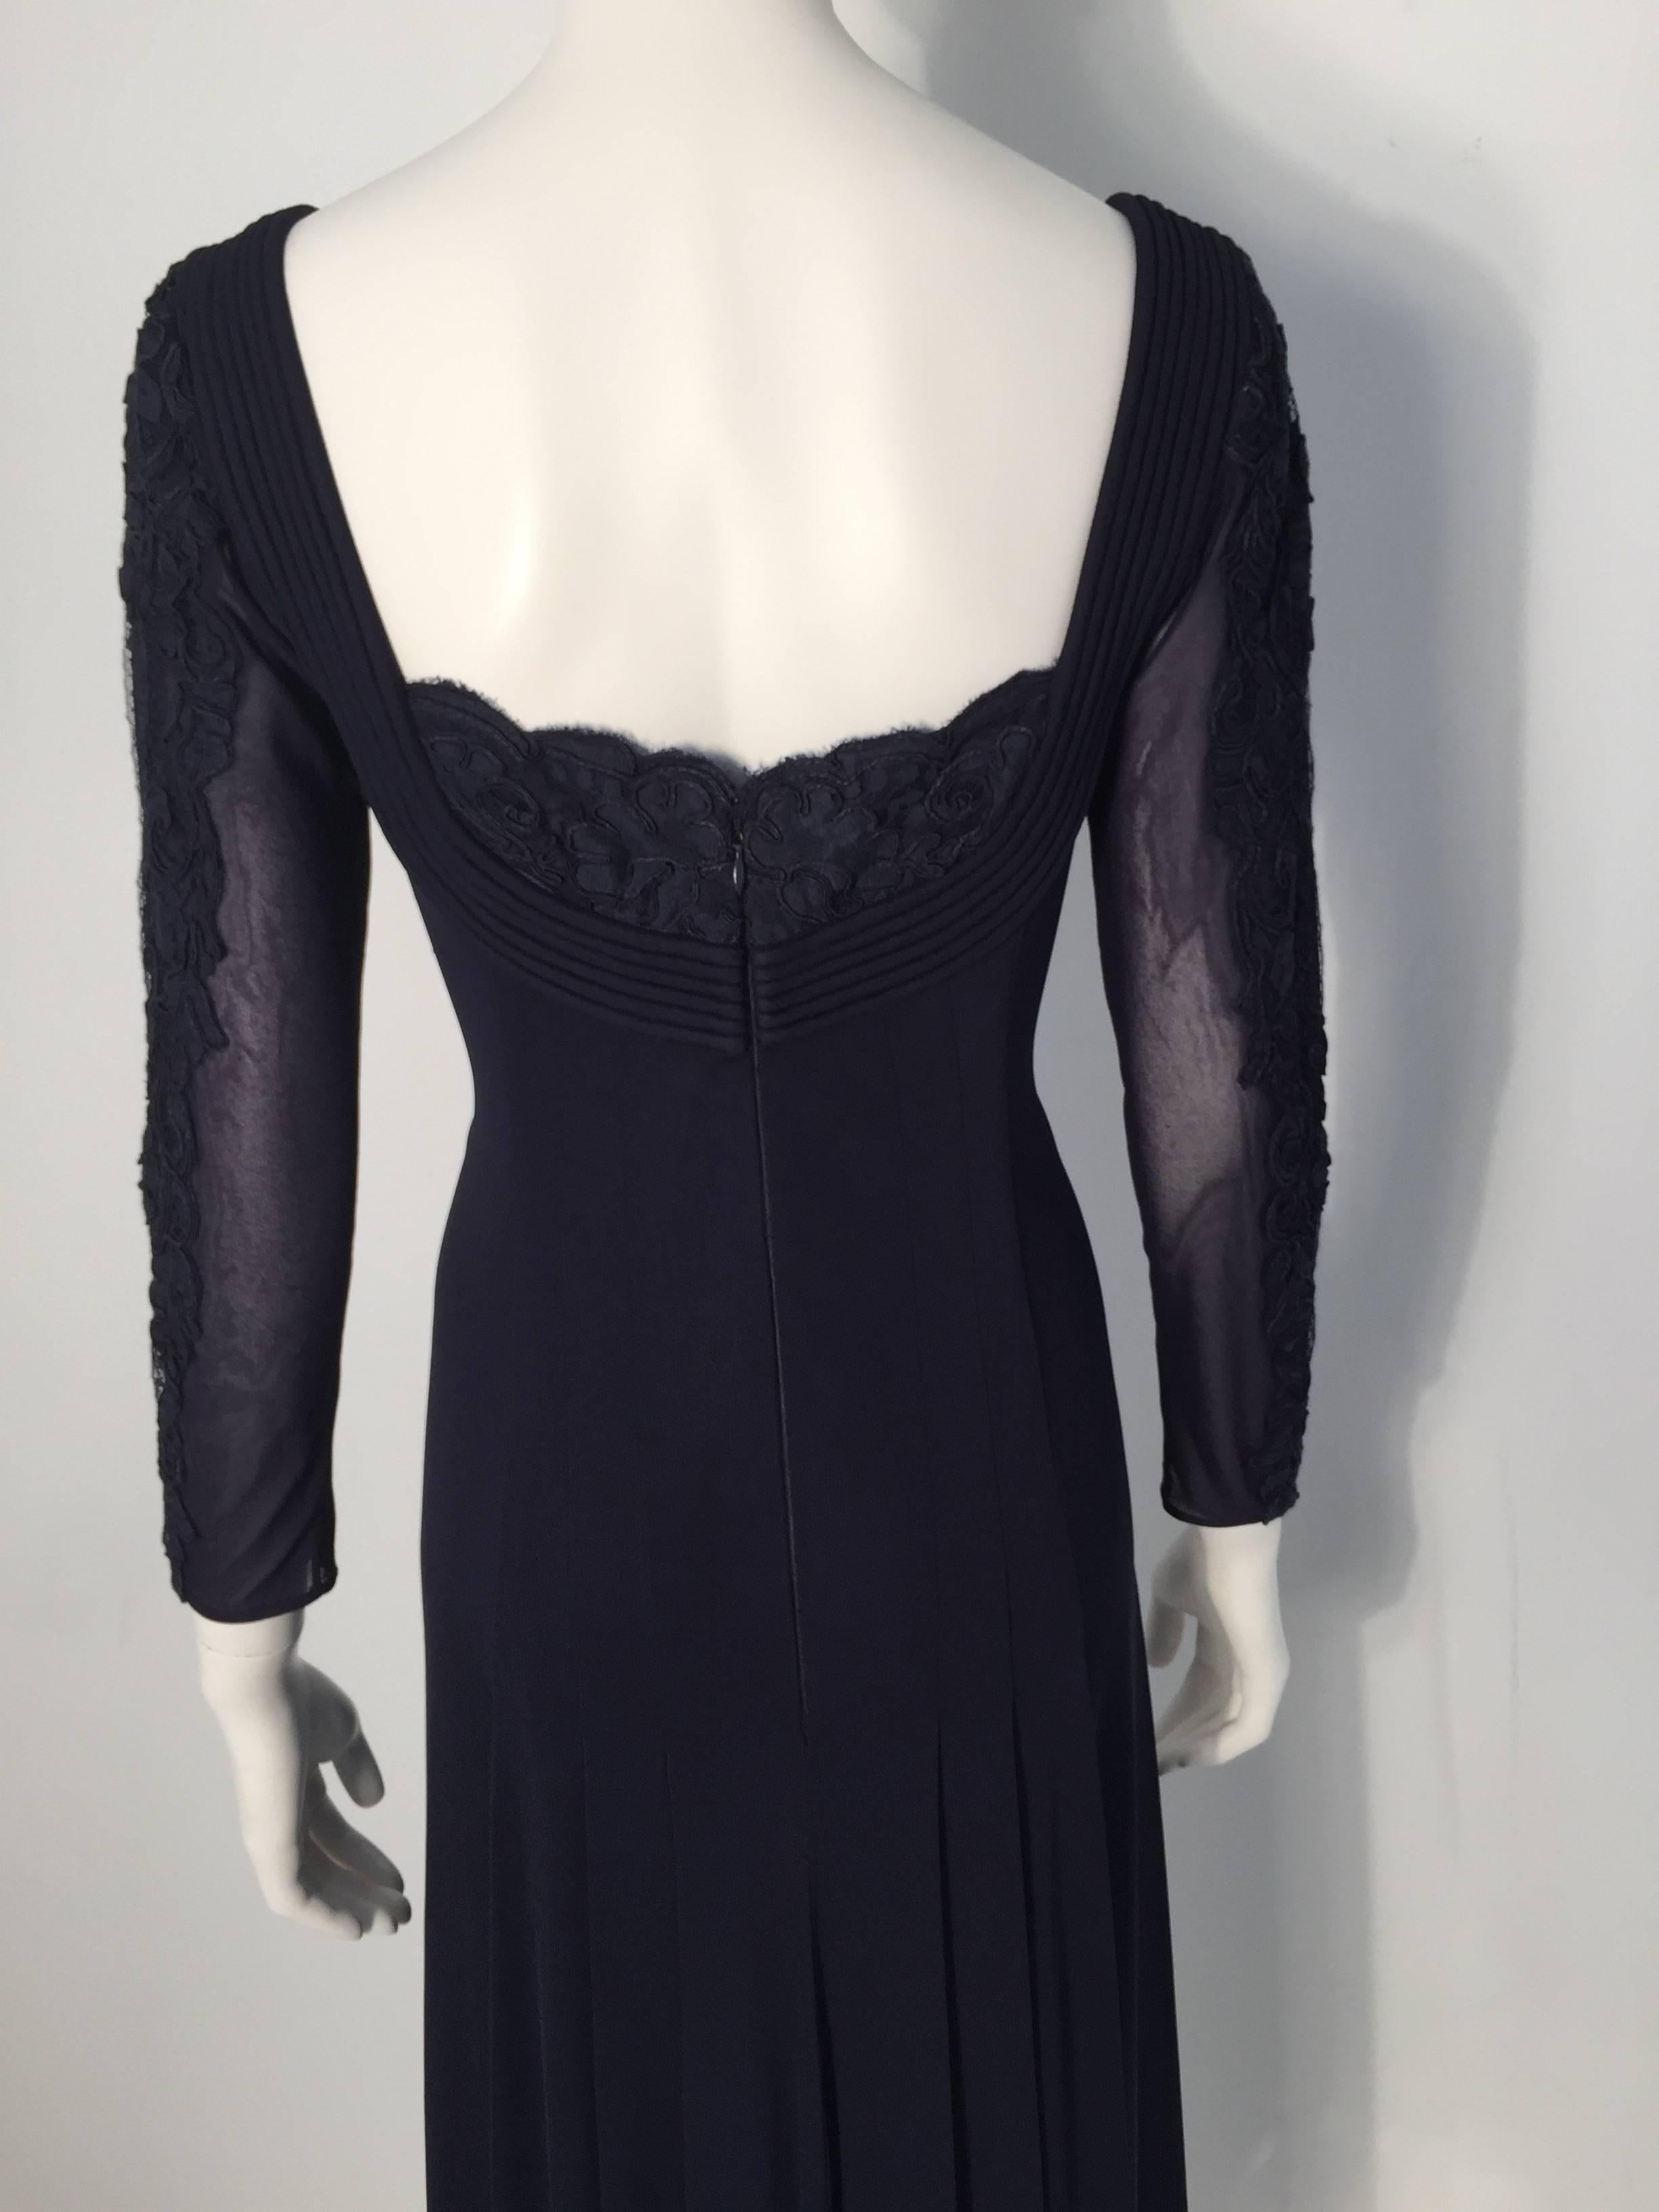 Loris Azzaro Navy Gown In Excellent Condition For Sale In New York, NY